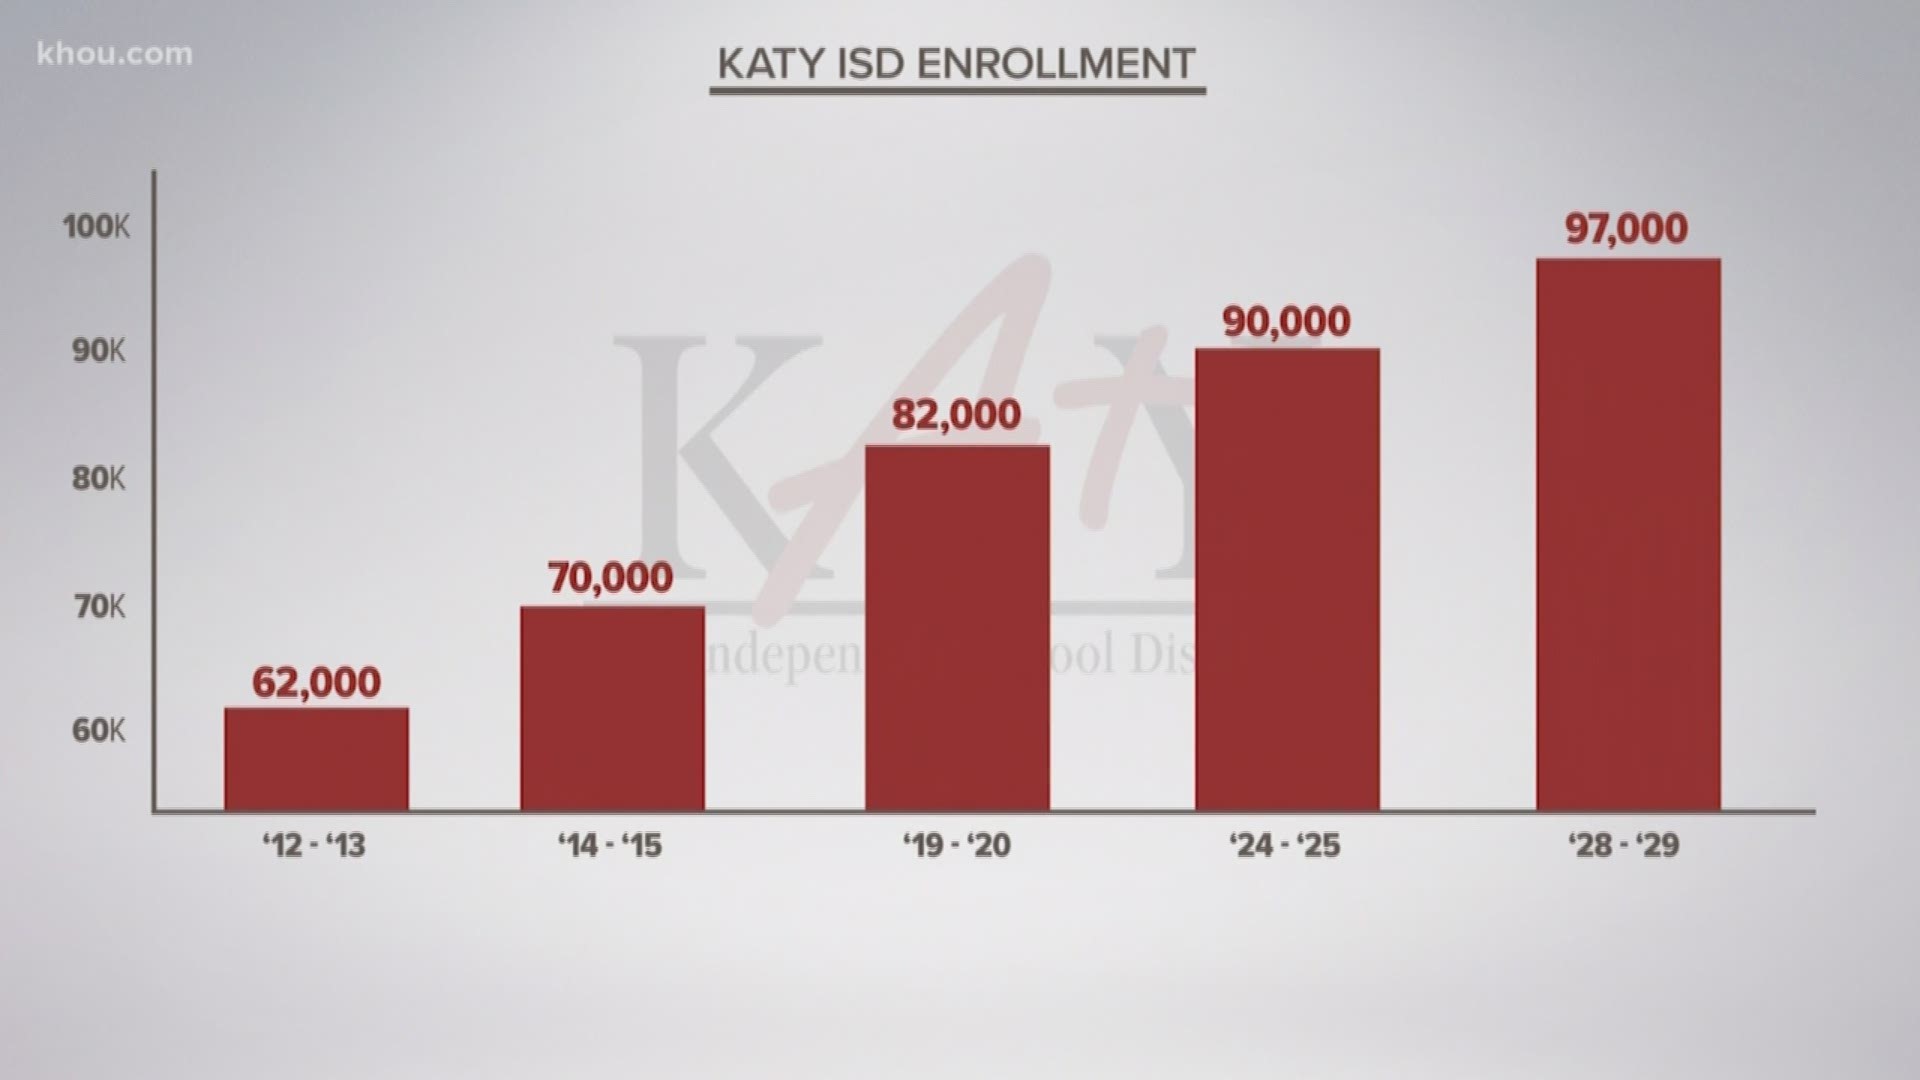 Katy ISD is preparing for explosive growth. The district expects to have more than 97,000 students by 2028. Several new schools are already under construction.